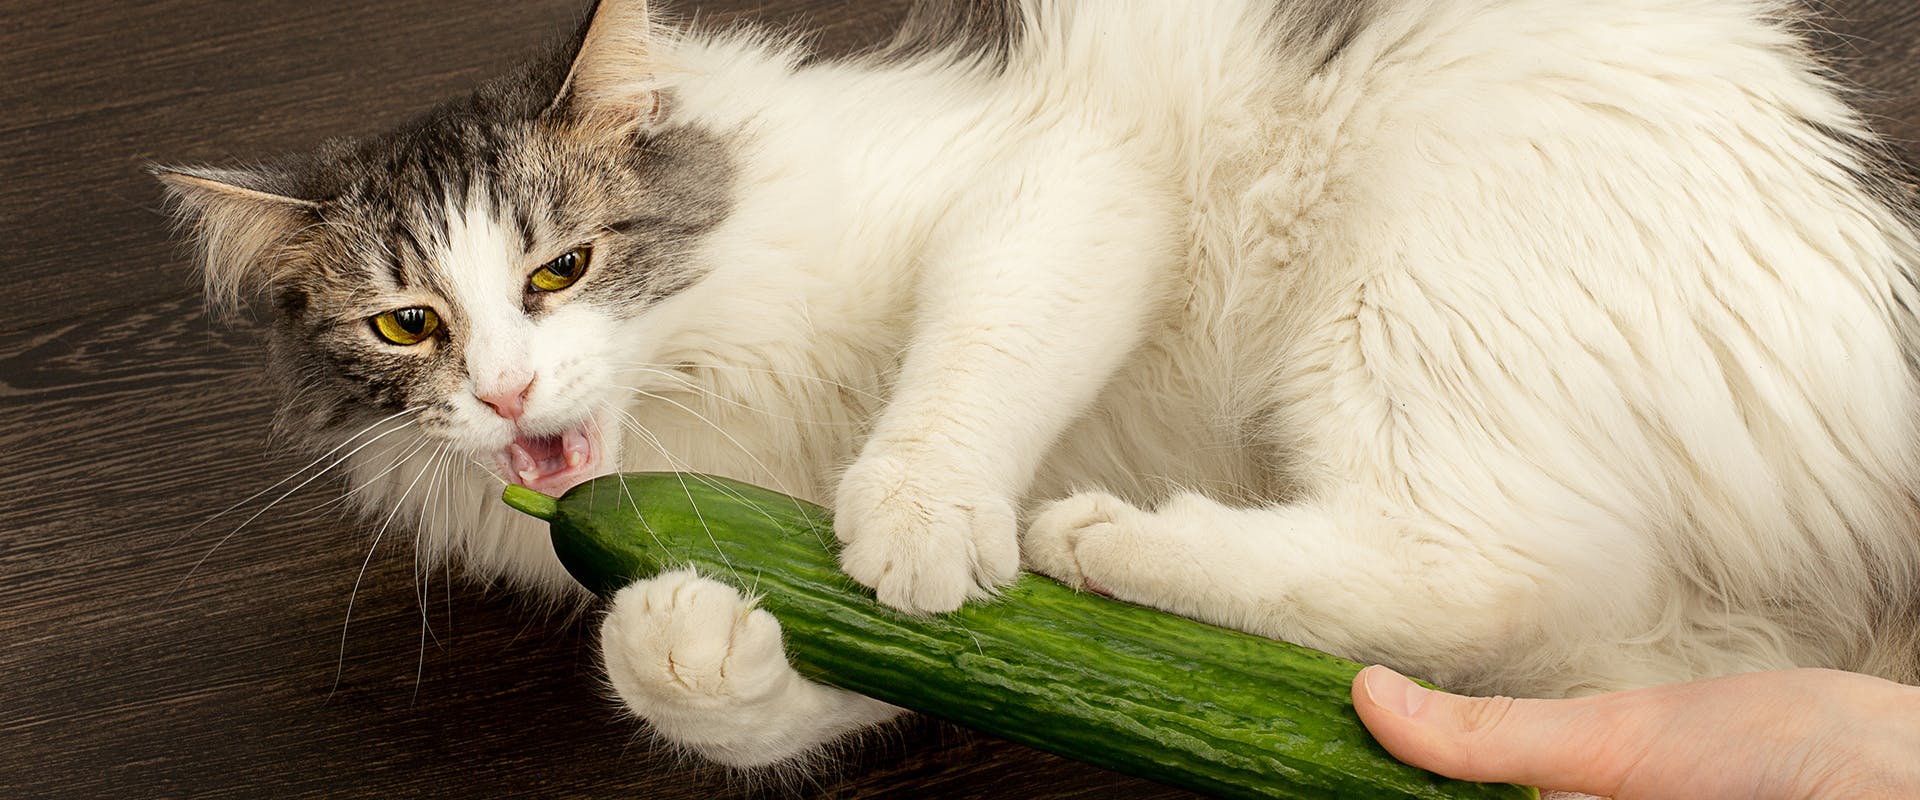 A cat playing and biting a cucumber